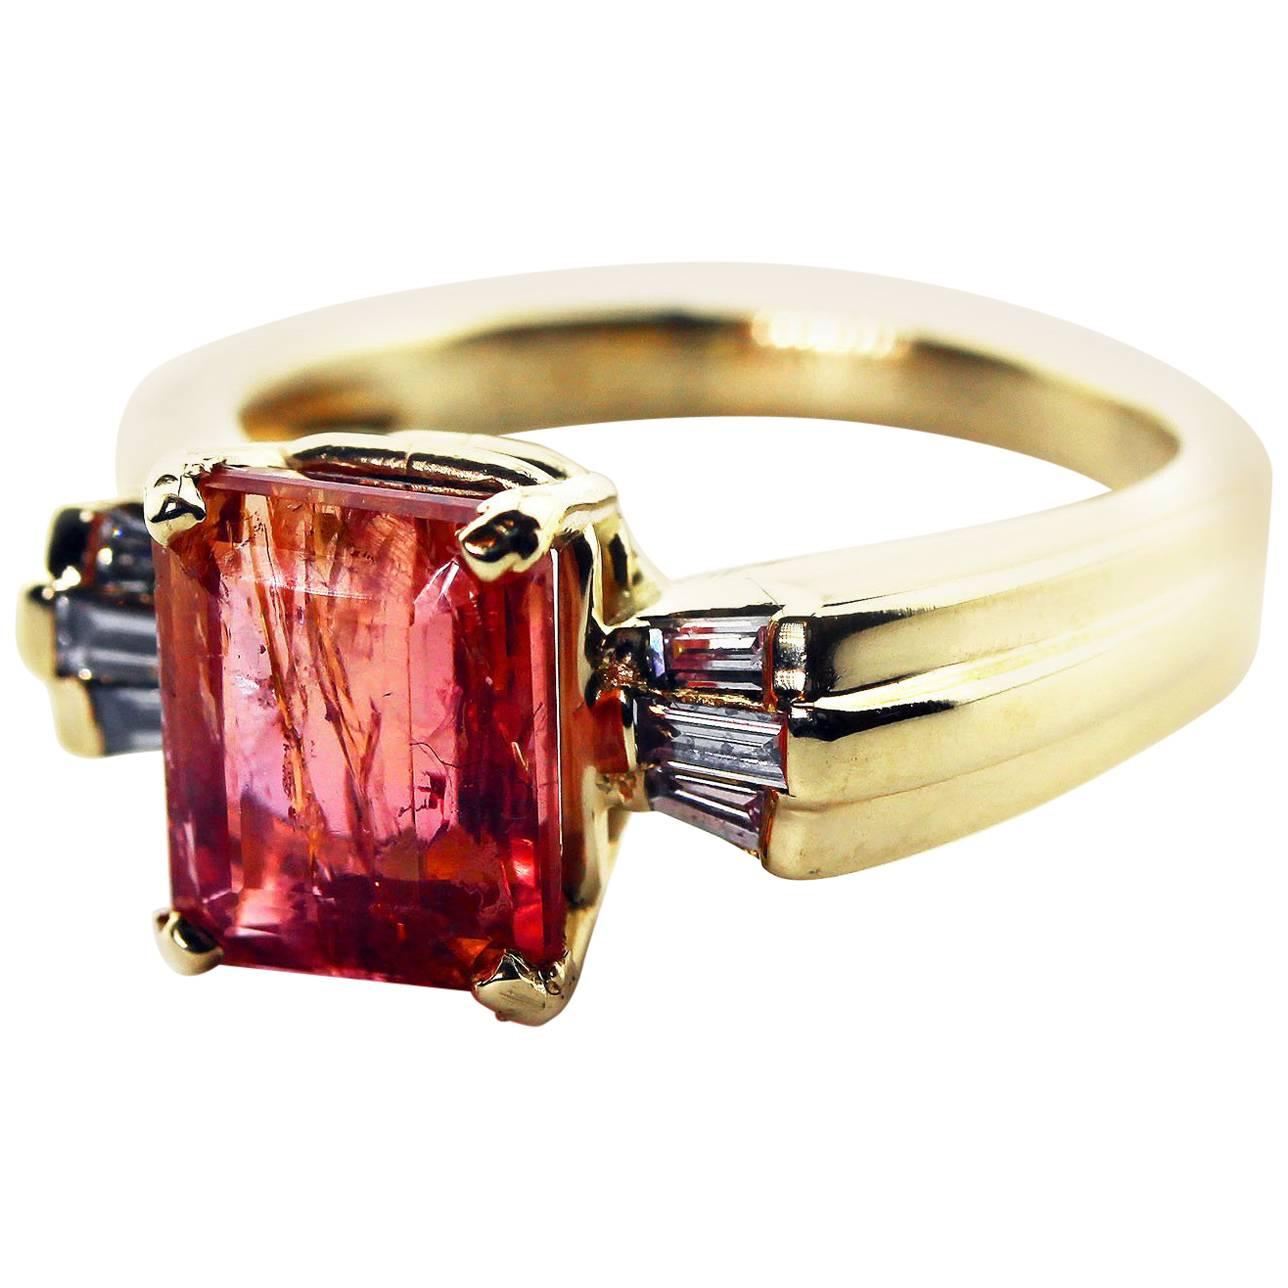 4.3 Carat Imperial Topaz and Diamond 14Kt Yellow Gold Ring